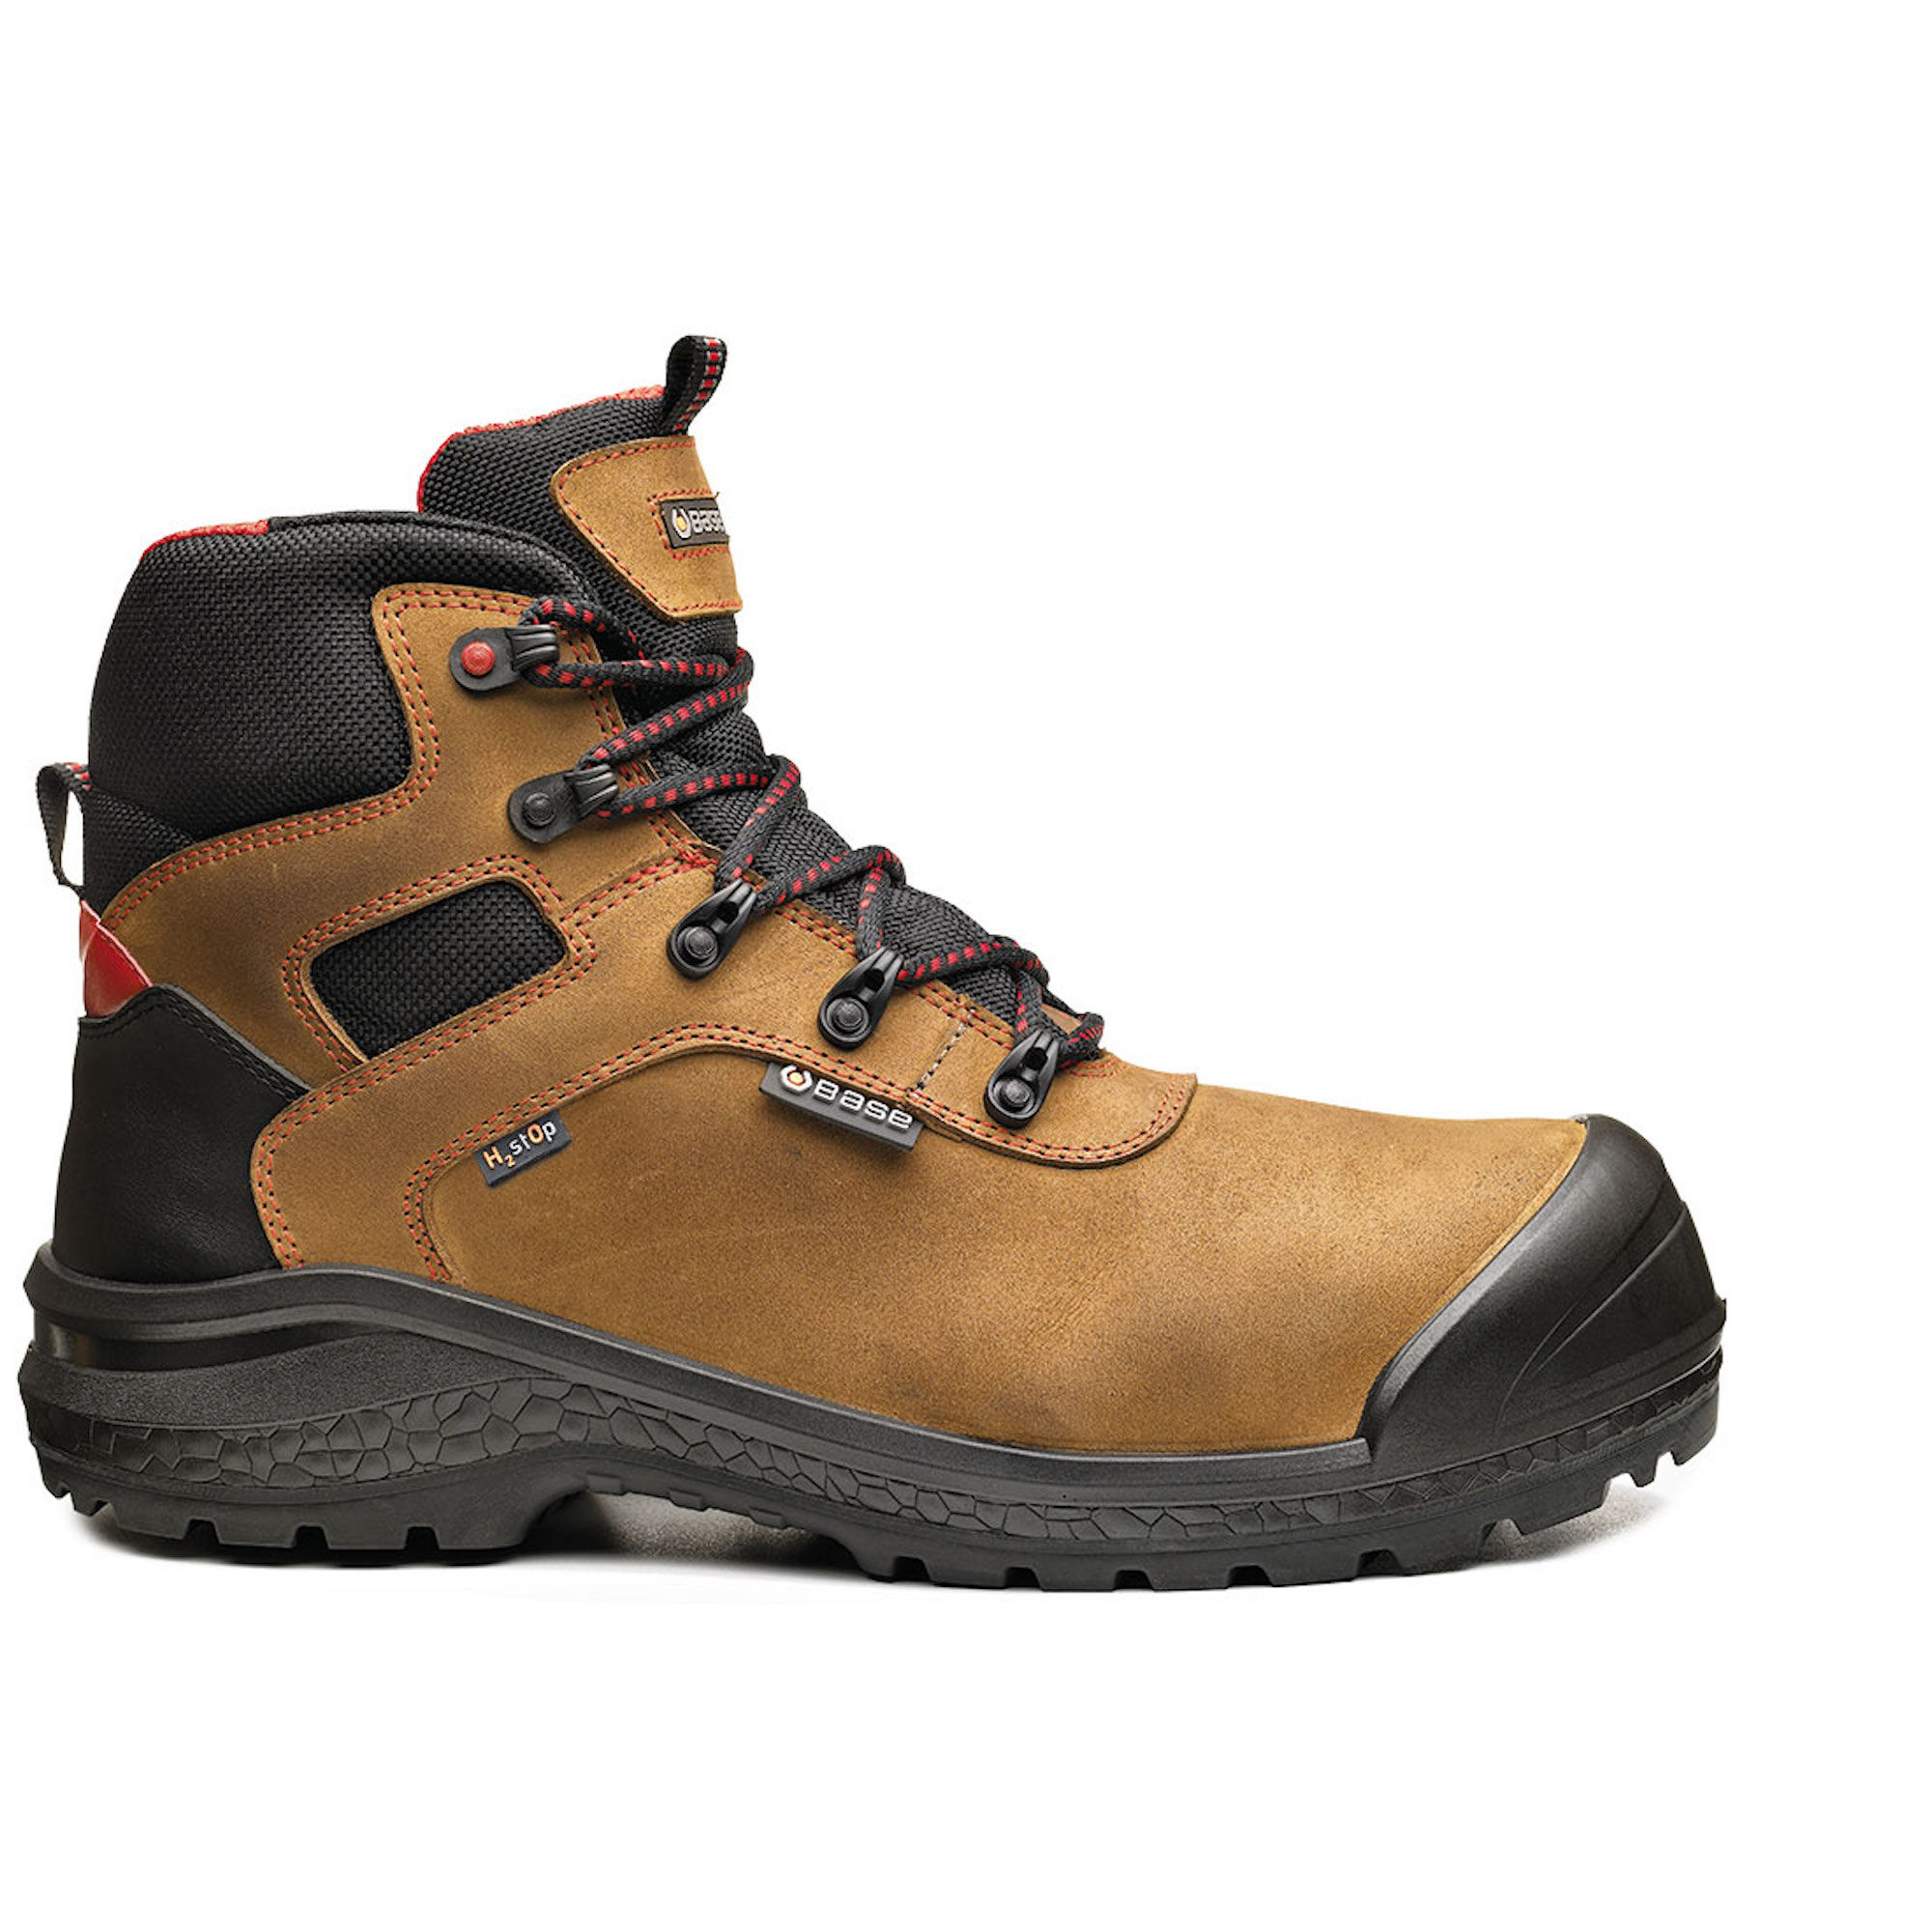 Portwest Be-Rock Safety Boots